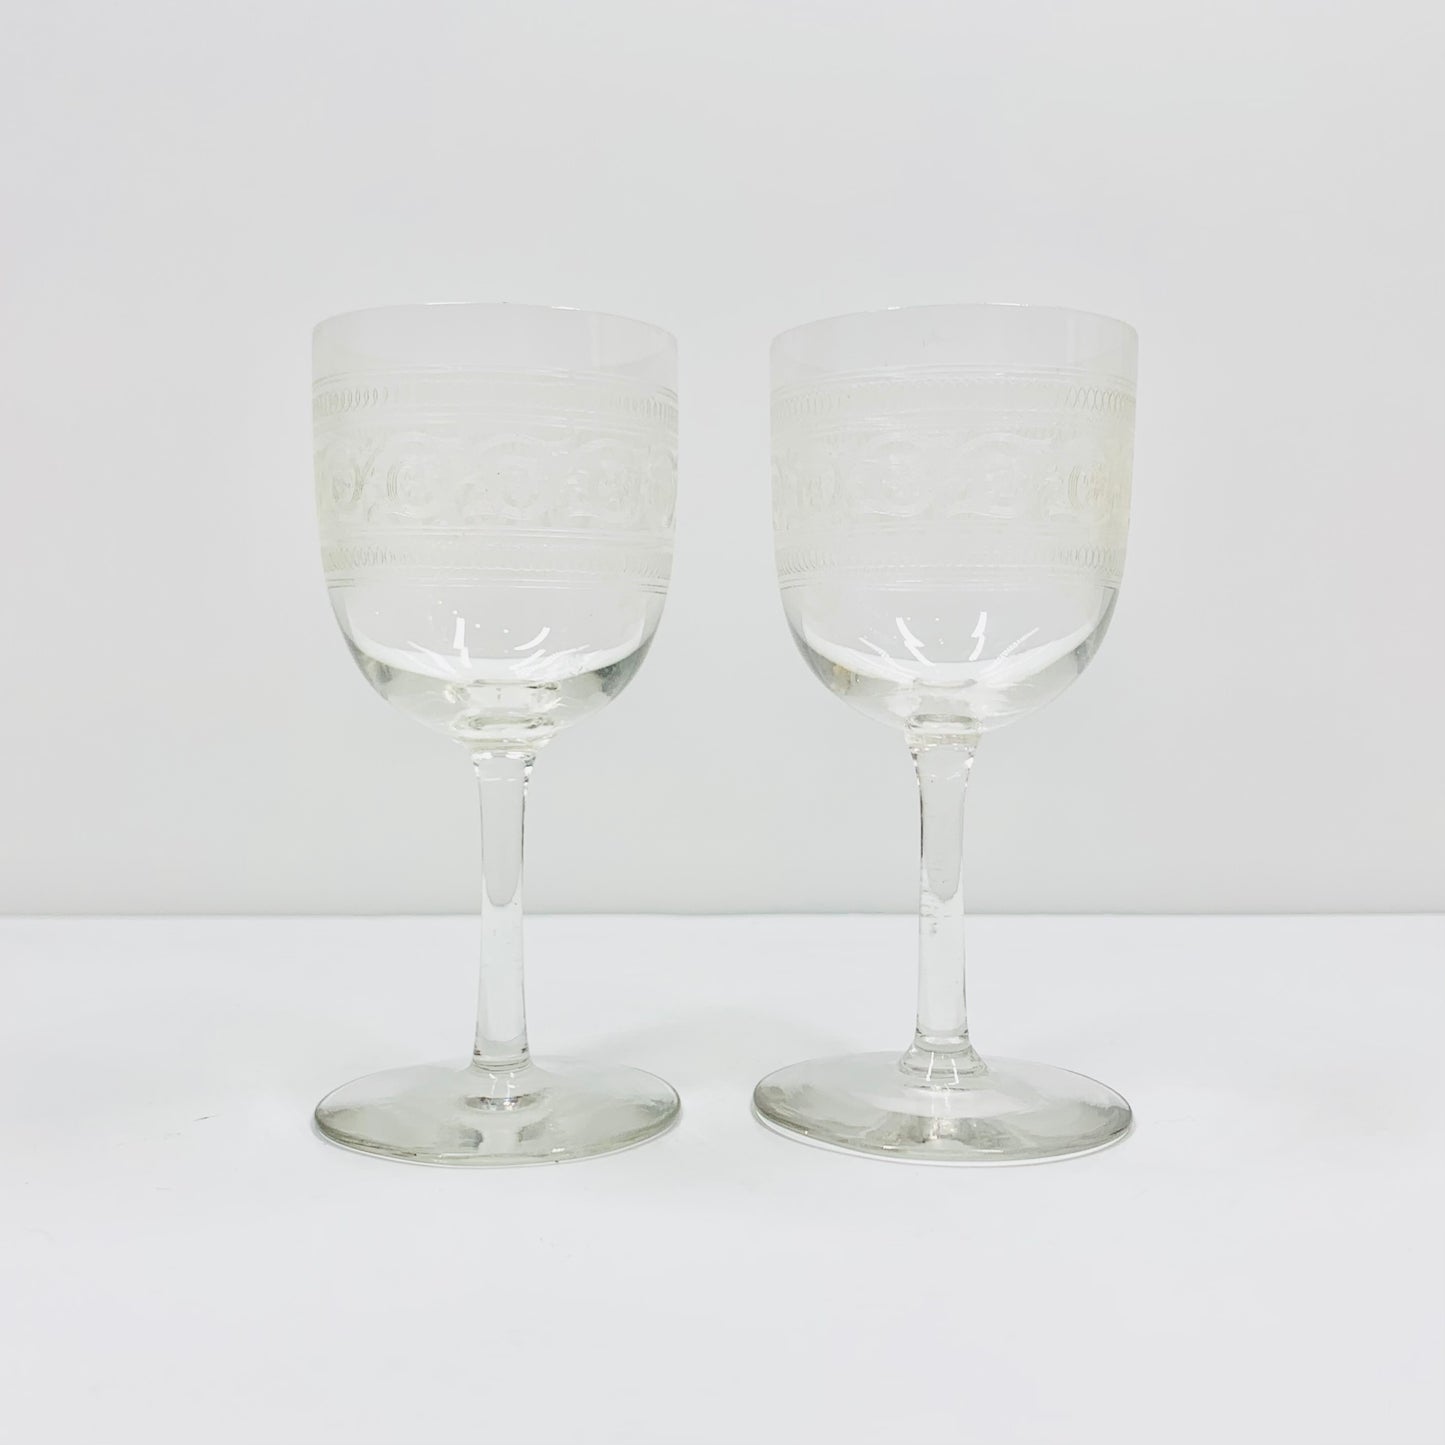 Antique hand etched sherry glasses